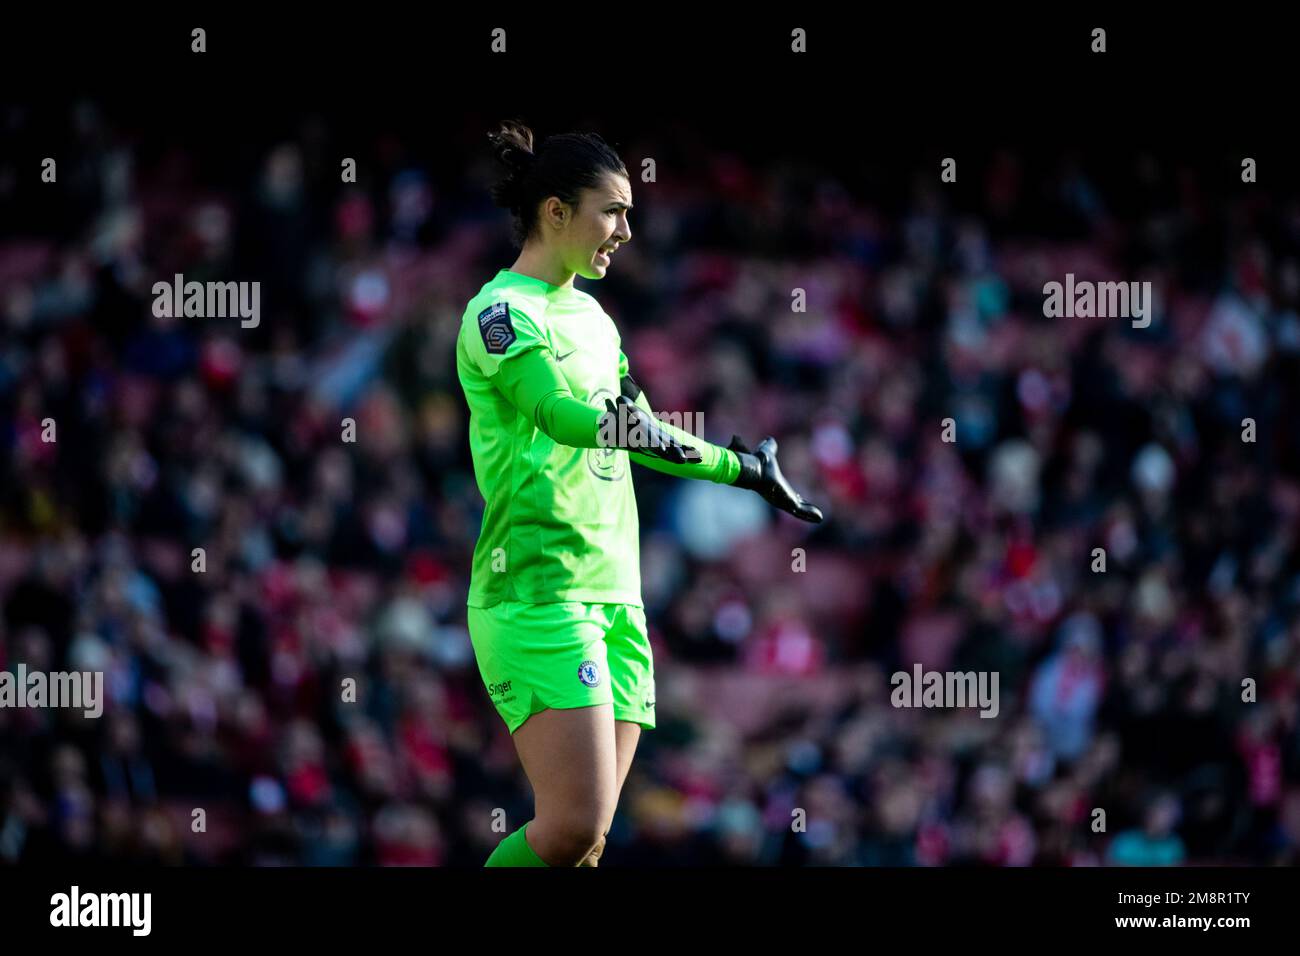 London, UK. 15th Jan, 2023. Goalkeeper Zecira Musovic (1 Chelsea) during the Barclays FA Womens Super League game between Arsenal and Chelsea at Emirates Stadium in London, England. (Liam Asman/SPP) Credit: SPP Sport Press Photo. /Alamy Live News Stock Photo